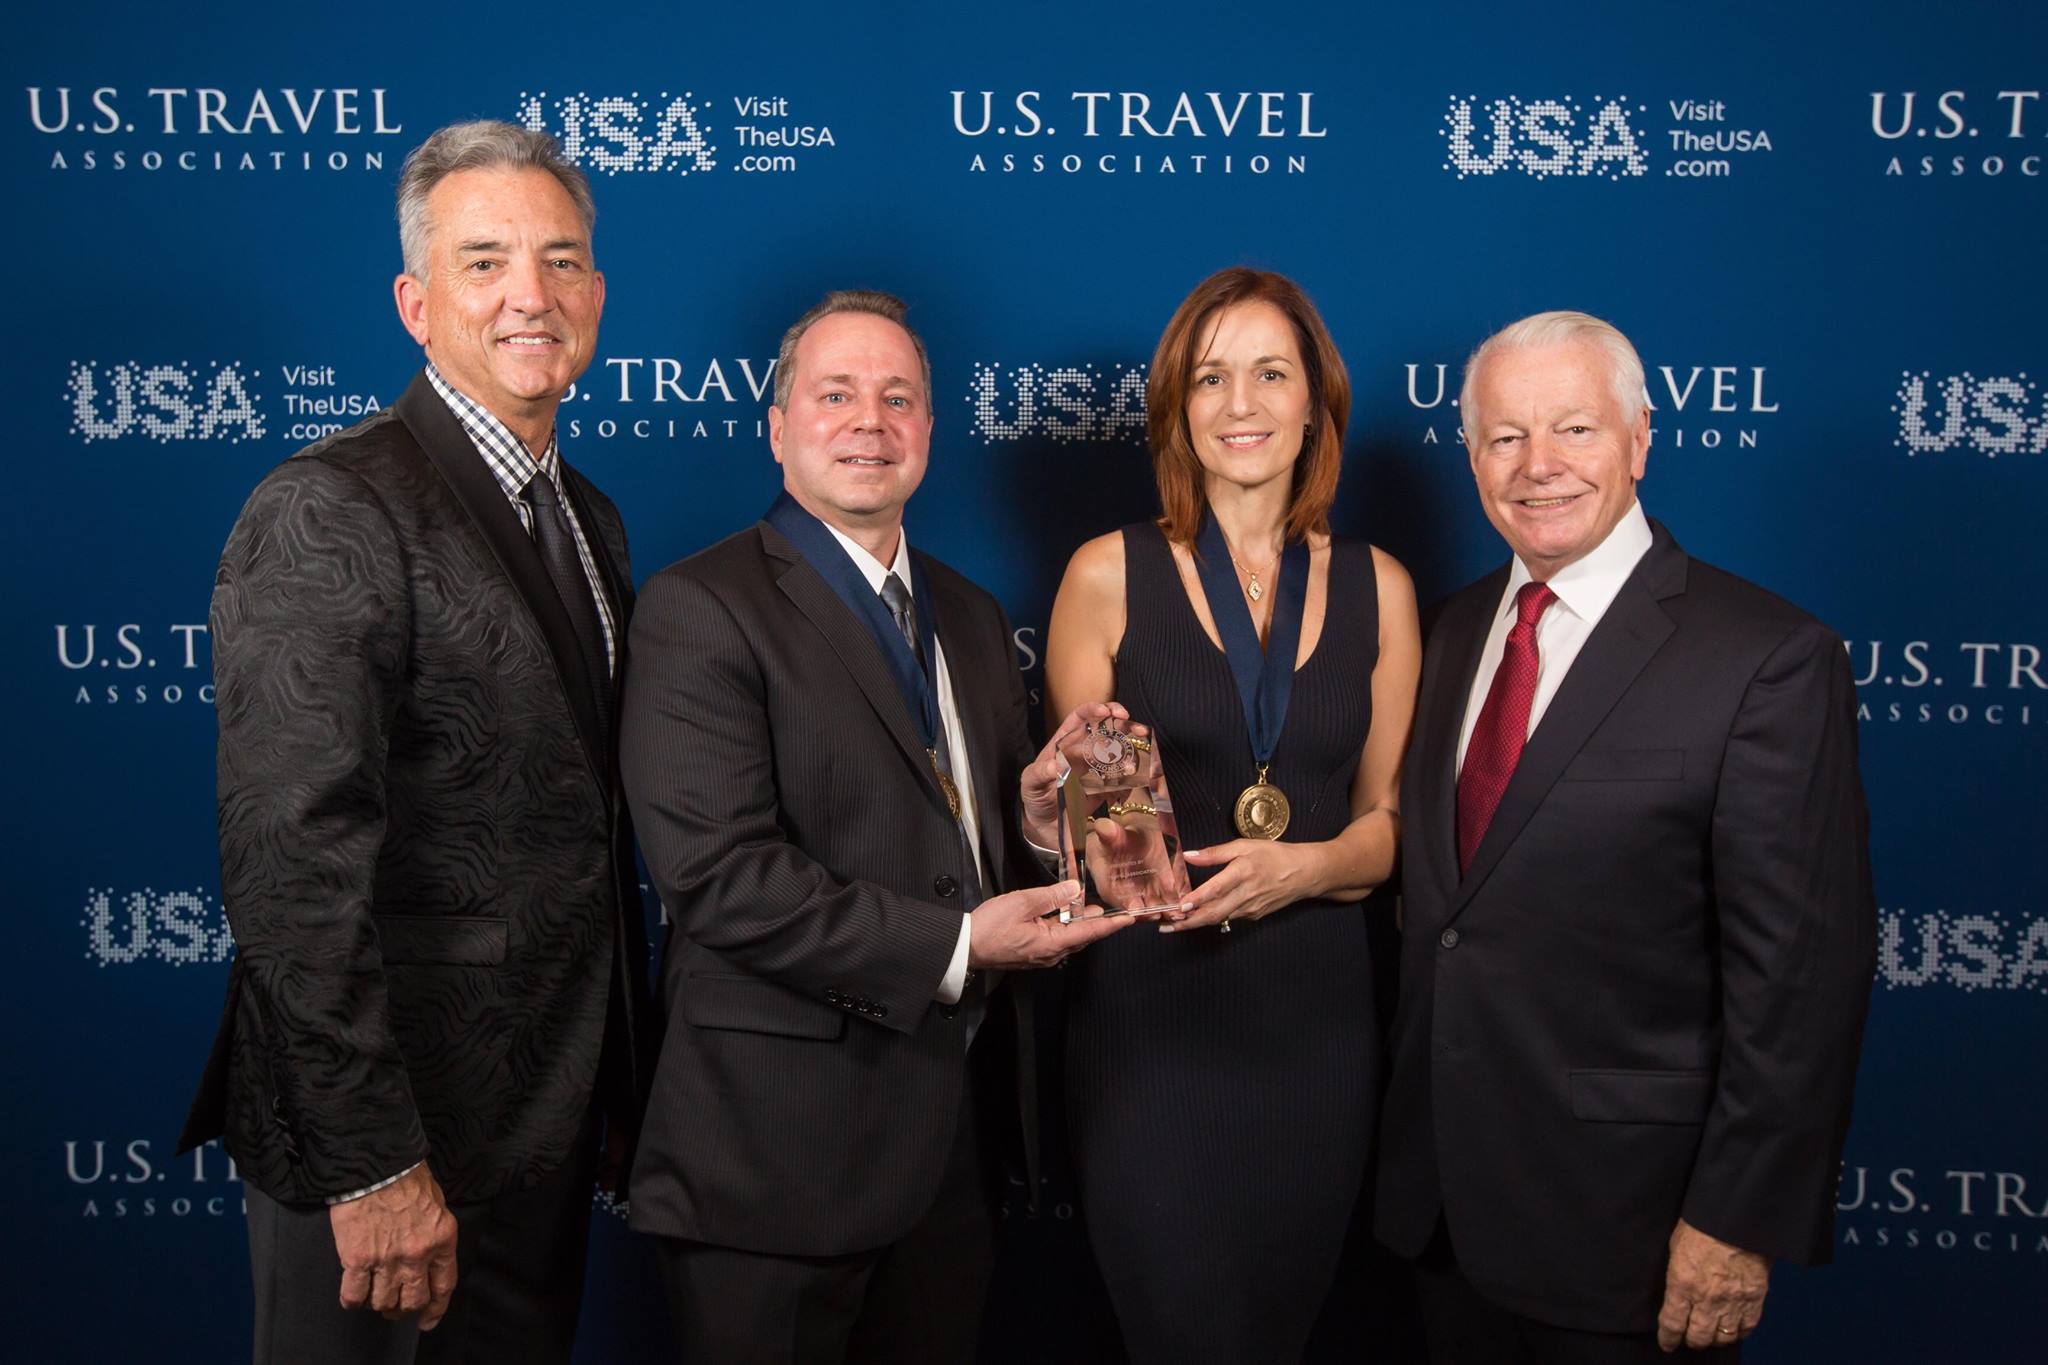 U.S. Travel Industry Recognizes Top International Tour Operators and